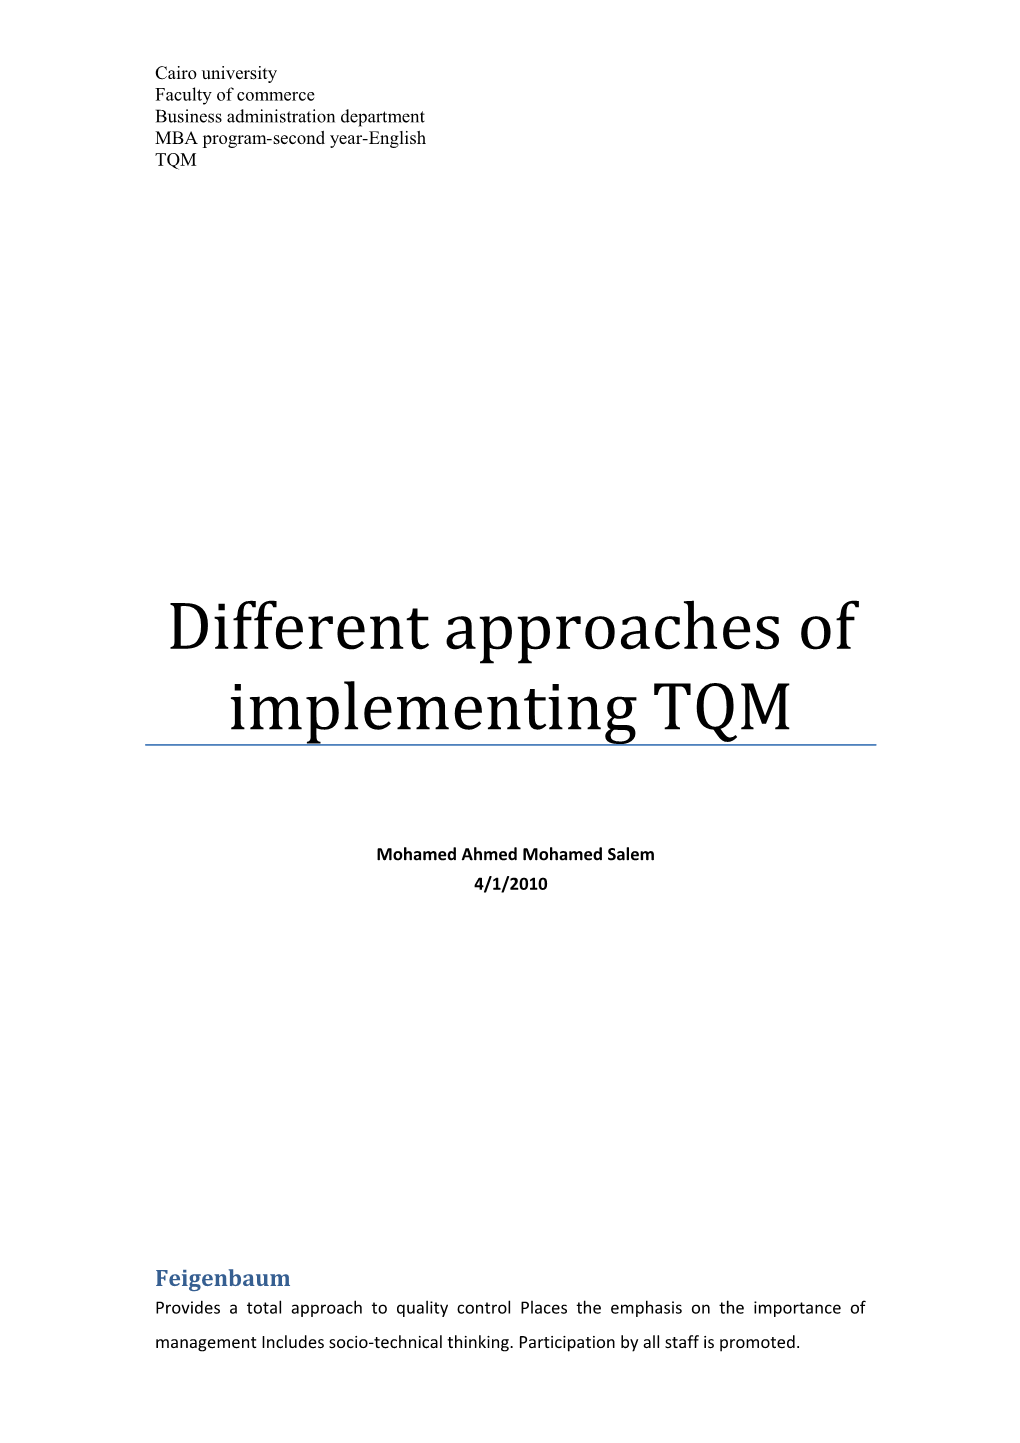 Different Approaches of Implementing TQM